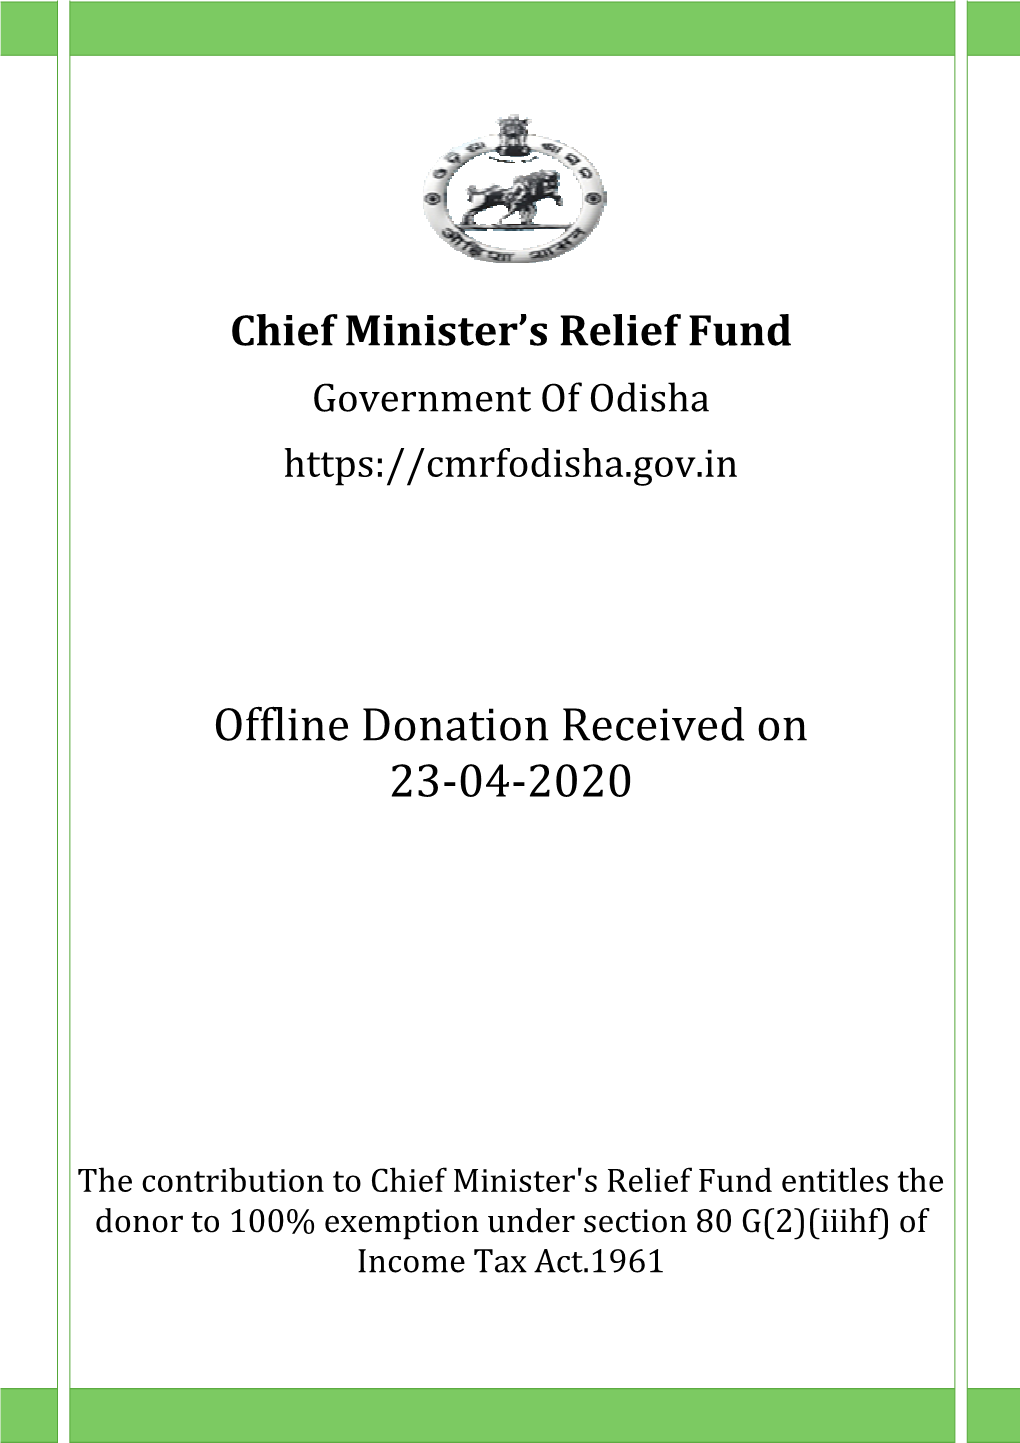 Offline Donation Re Offline Donation Received on 23-04-2020 On